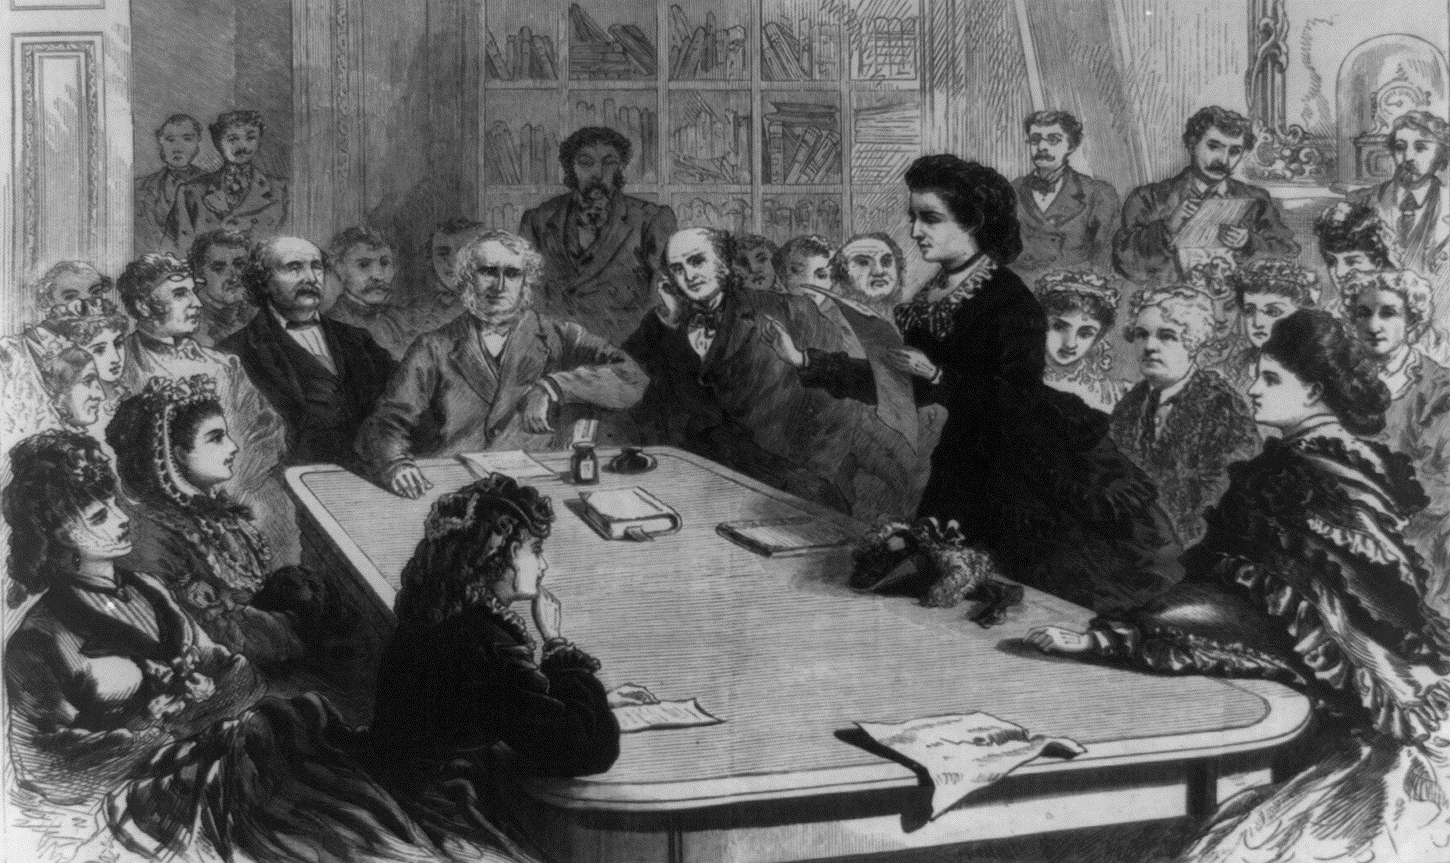 Victoria Claﬂin Woodhull reading an argument in favor of women’s suﬀrage to the Judiciary Committee of the House of Representatives, 1871.